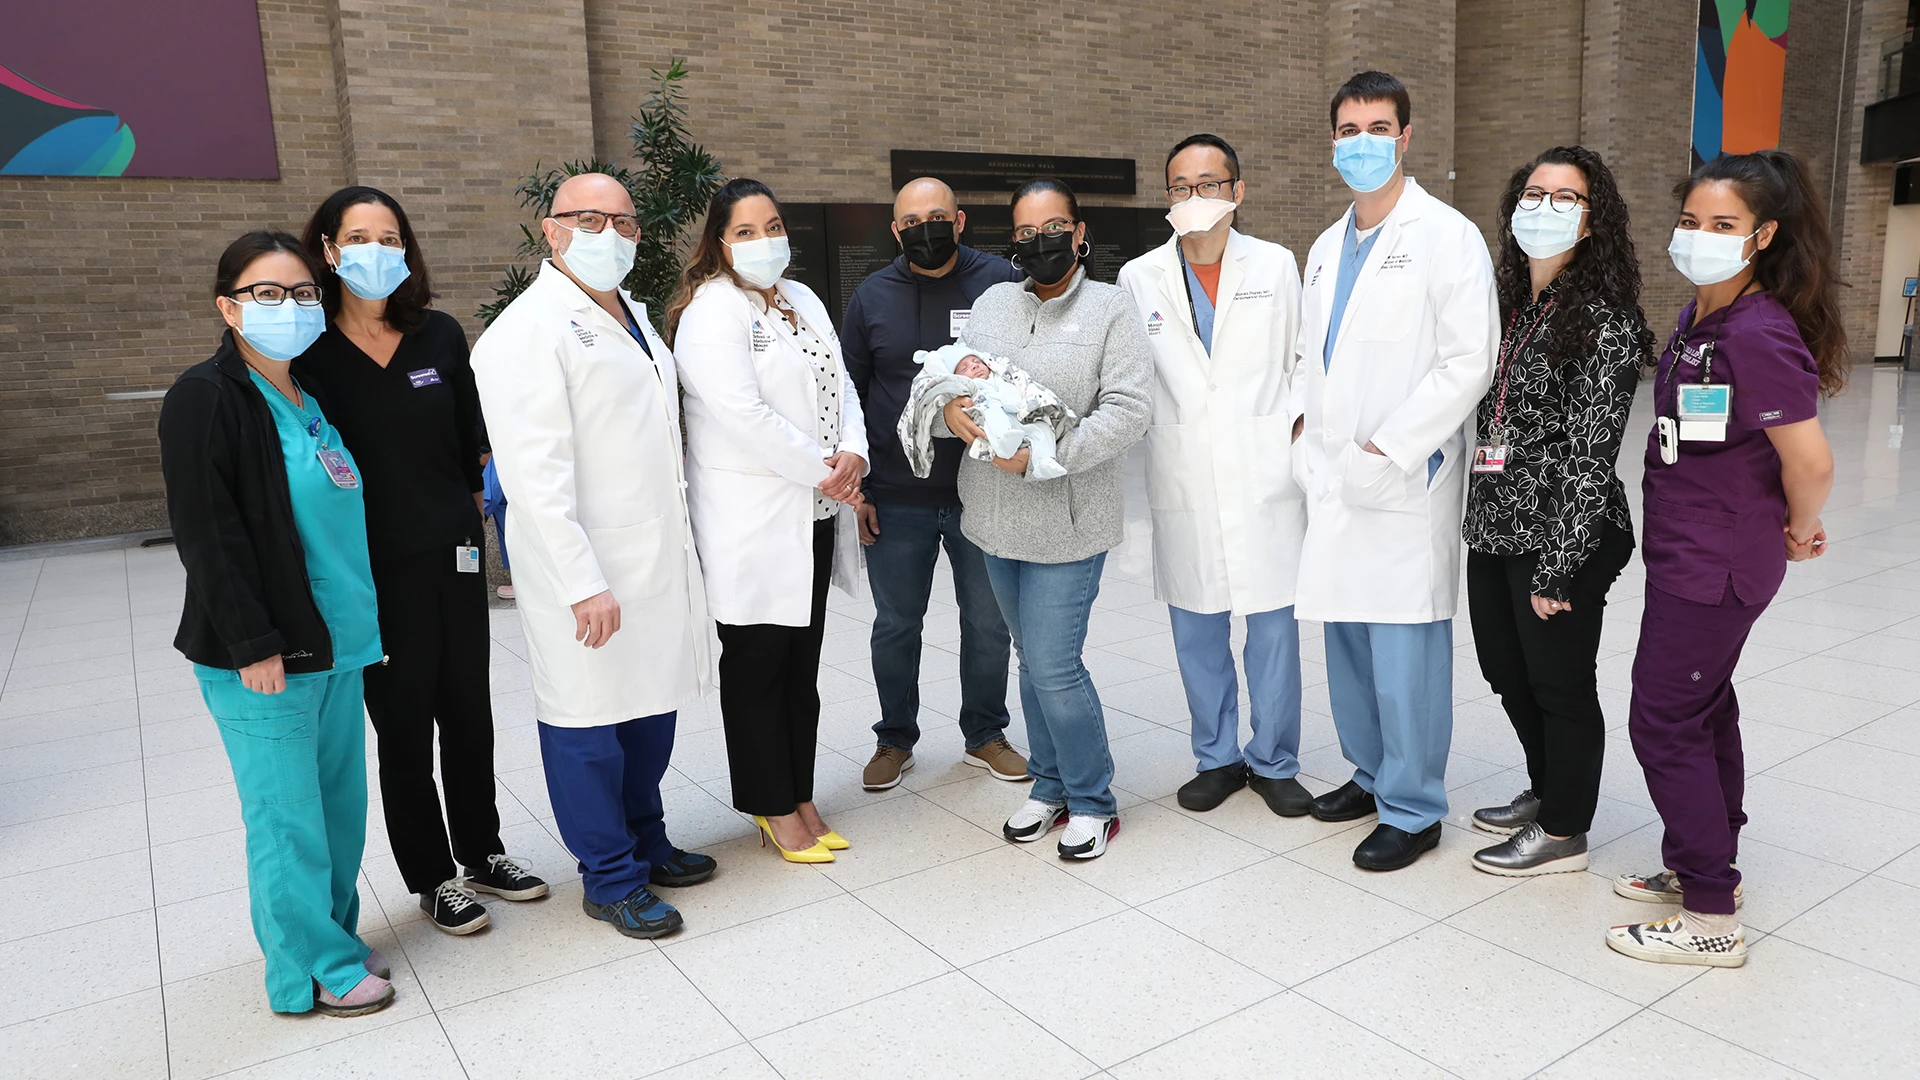 Yesenia, Martin, and Elias Lopez at The Mount Sinai Hospital in May 2021, surrounded by their team, from left: Jannette Valentin, RN; Jill Winston, LCSW; Francesco Callipari, MD; Sanam Ahmed, MD; Shinobu Itagaki, MD; Gregory Serrao; MD; Jenna Mennella, MD; and Claire Pettengill, Child Life Specialist.